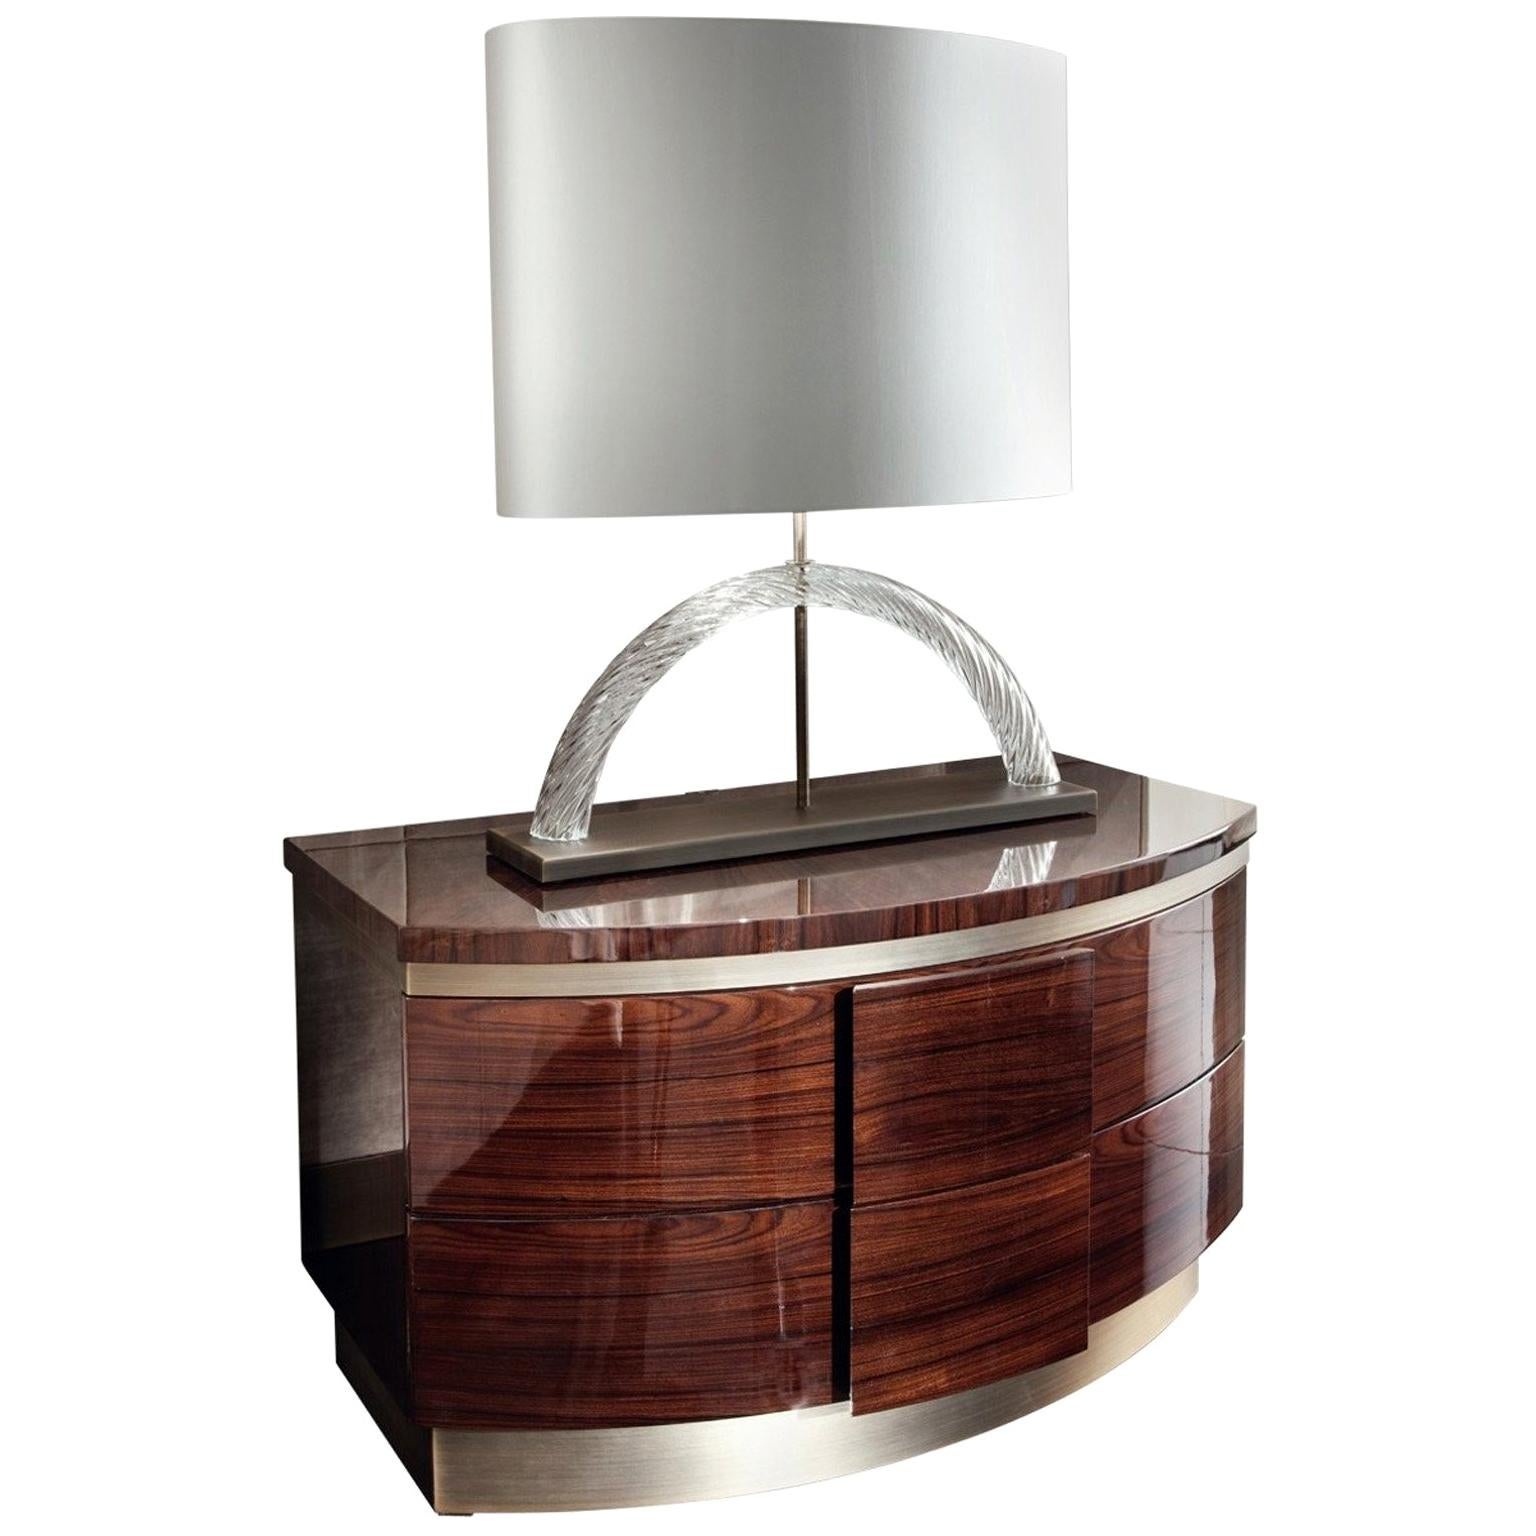 Nightstand sunburst top of Brazilian rosewood veneer, this night table is a striking piece. It is finished in a high gloss
veneer and set over a bronzed stainless steel base. This piece features two drawers for ample storage; both are lined in